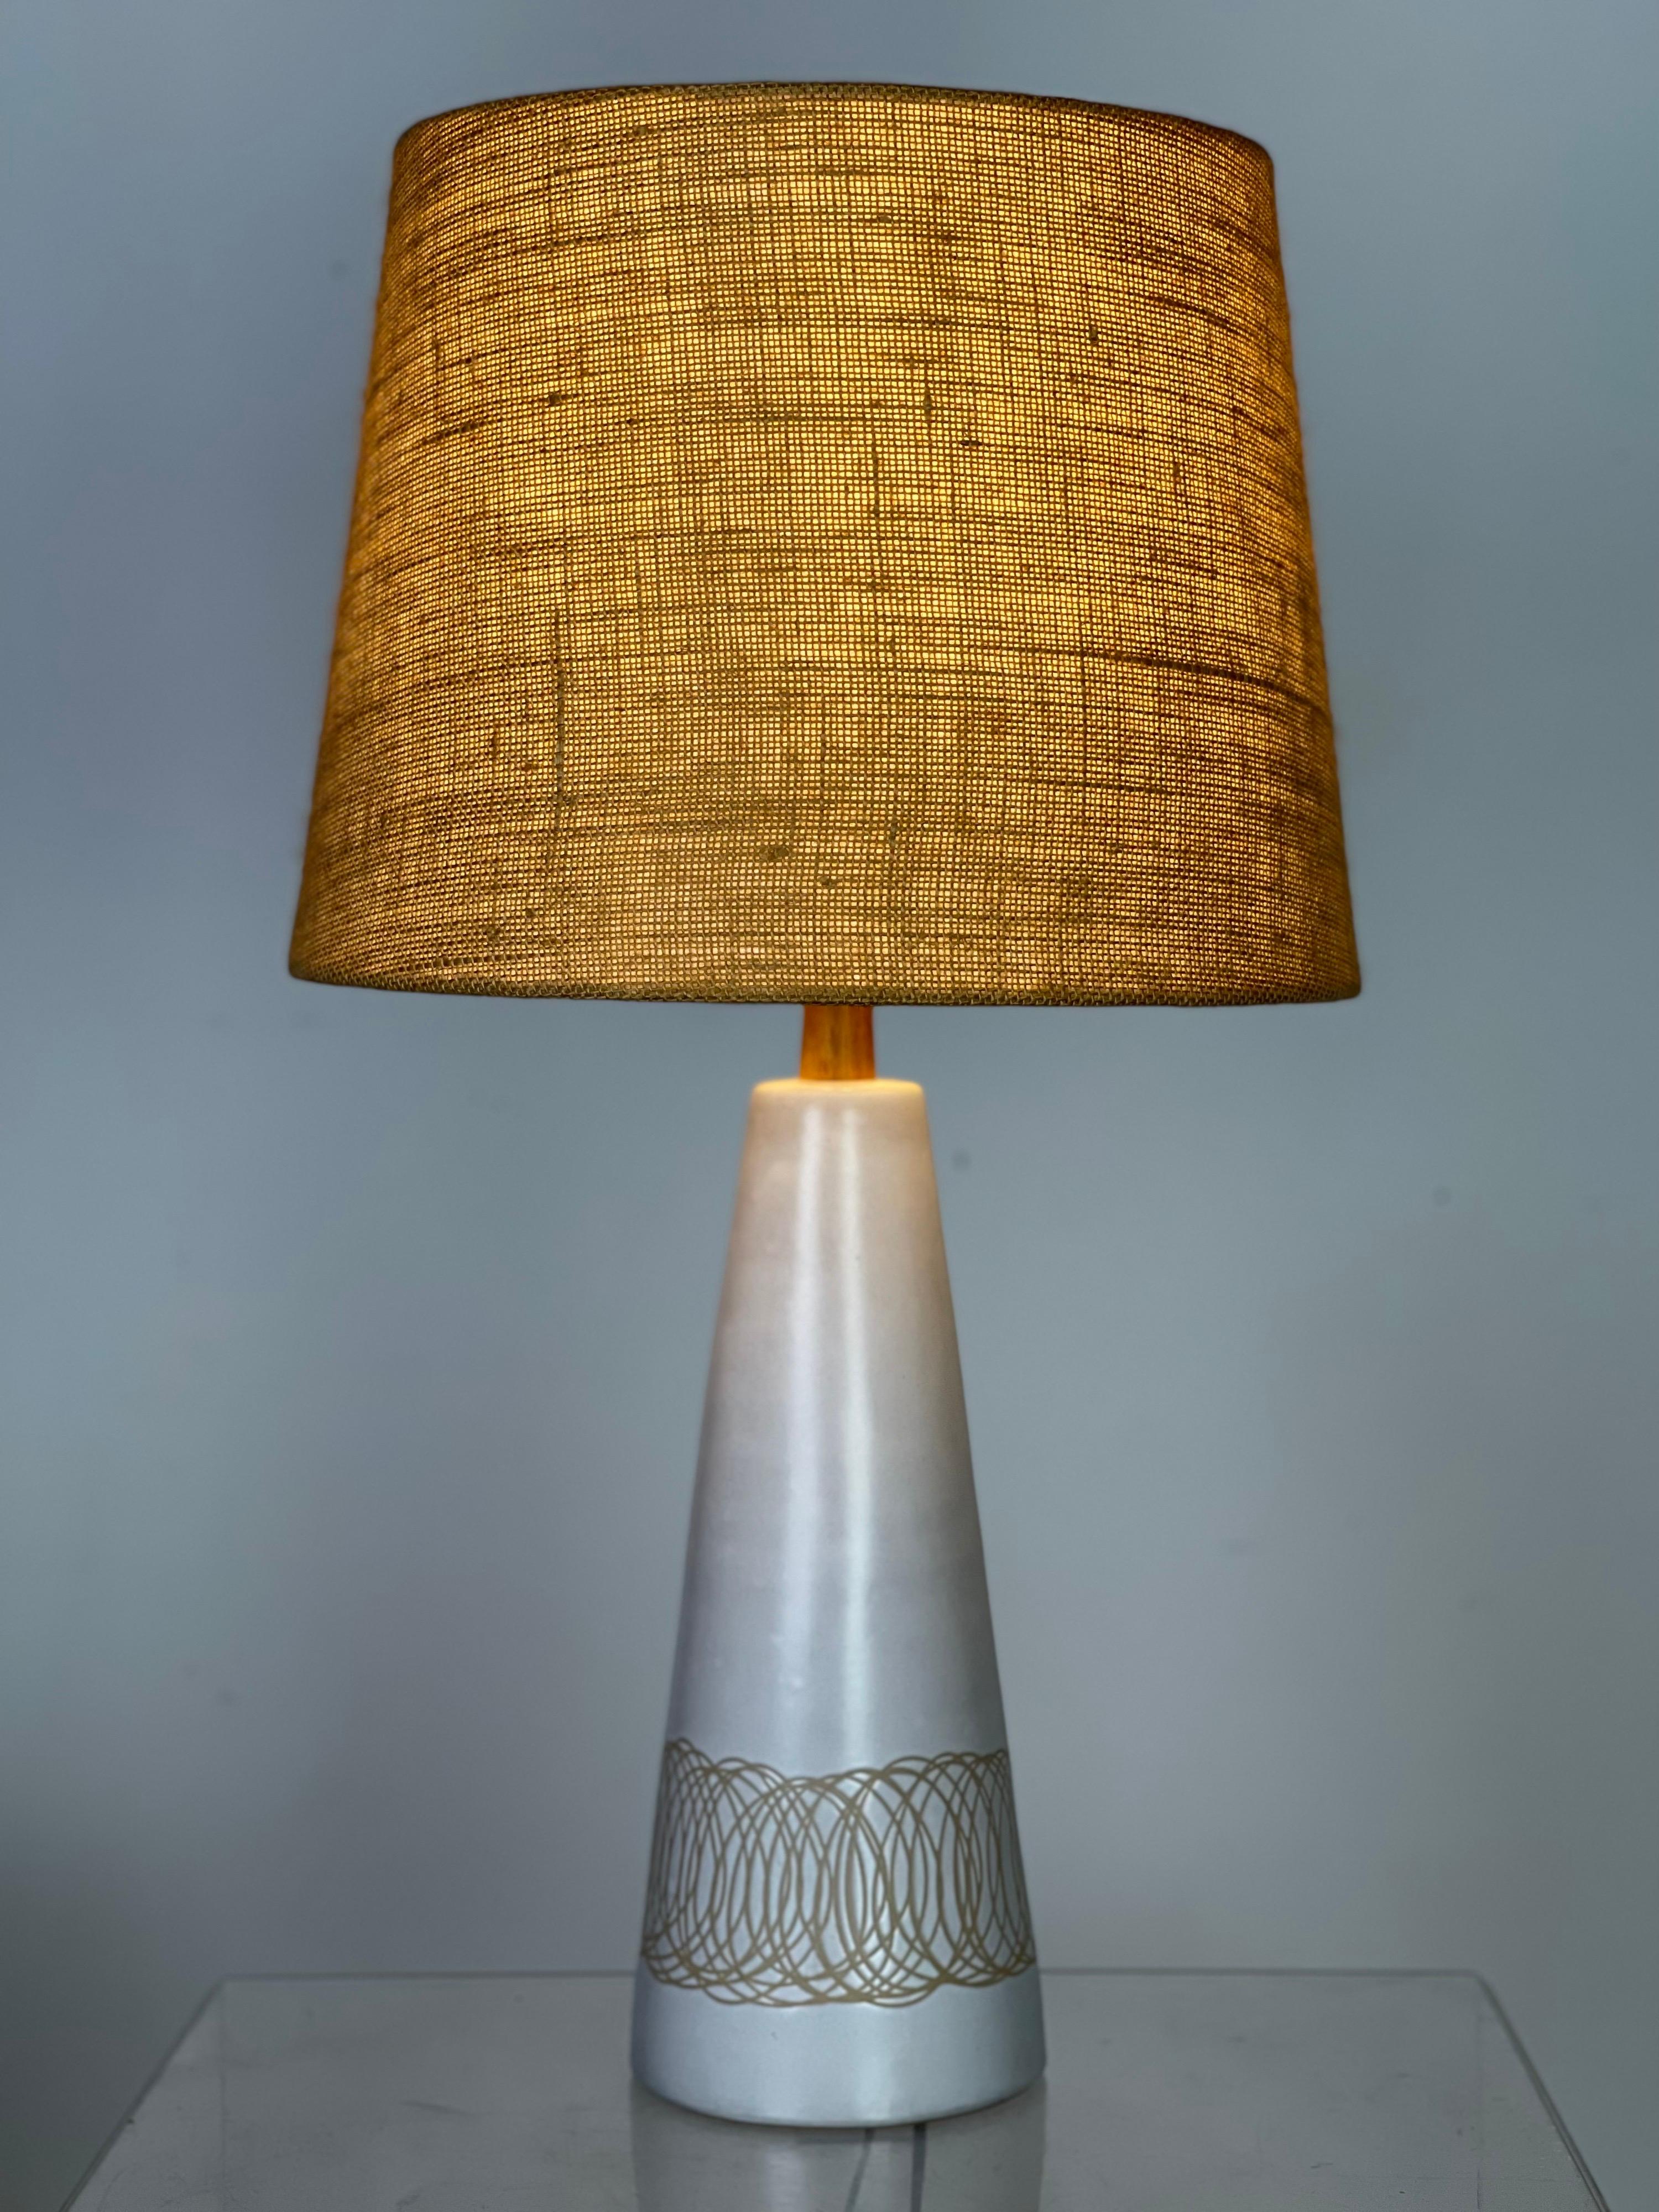 Lovely inverted cone shape lamp with the desirable incised sgraffito etchings/patterns by iconic lighting designers Jane & Gordon Martz for Marshall Studios. No chips or any issues. It has been rewired. Shade is not included. 
Measures: 29